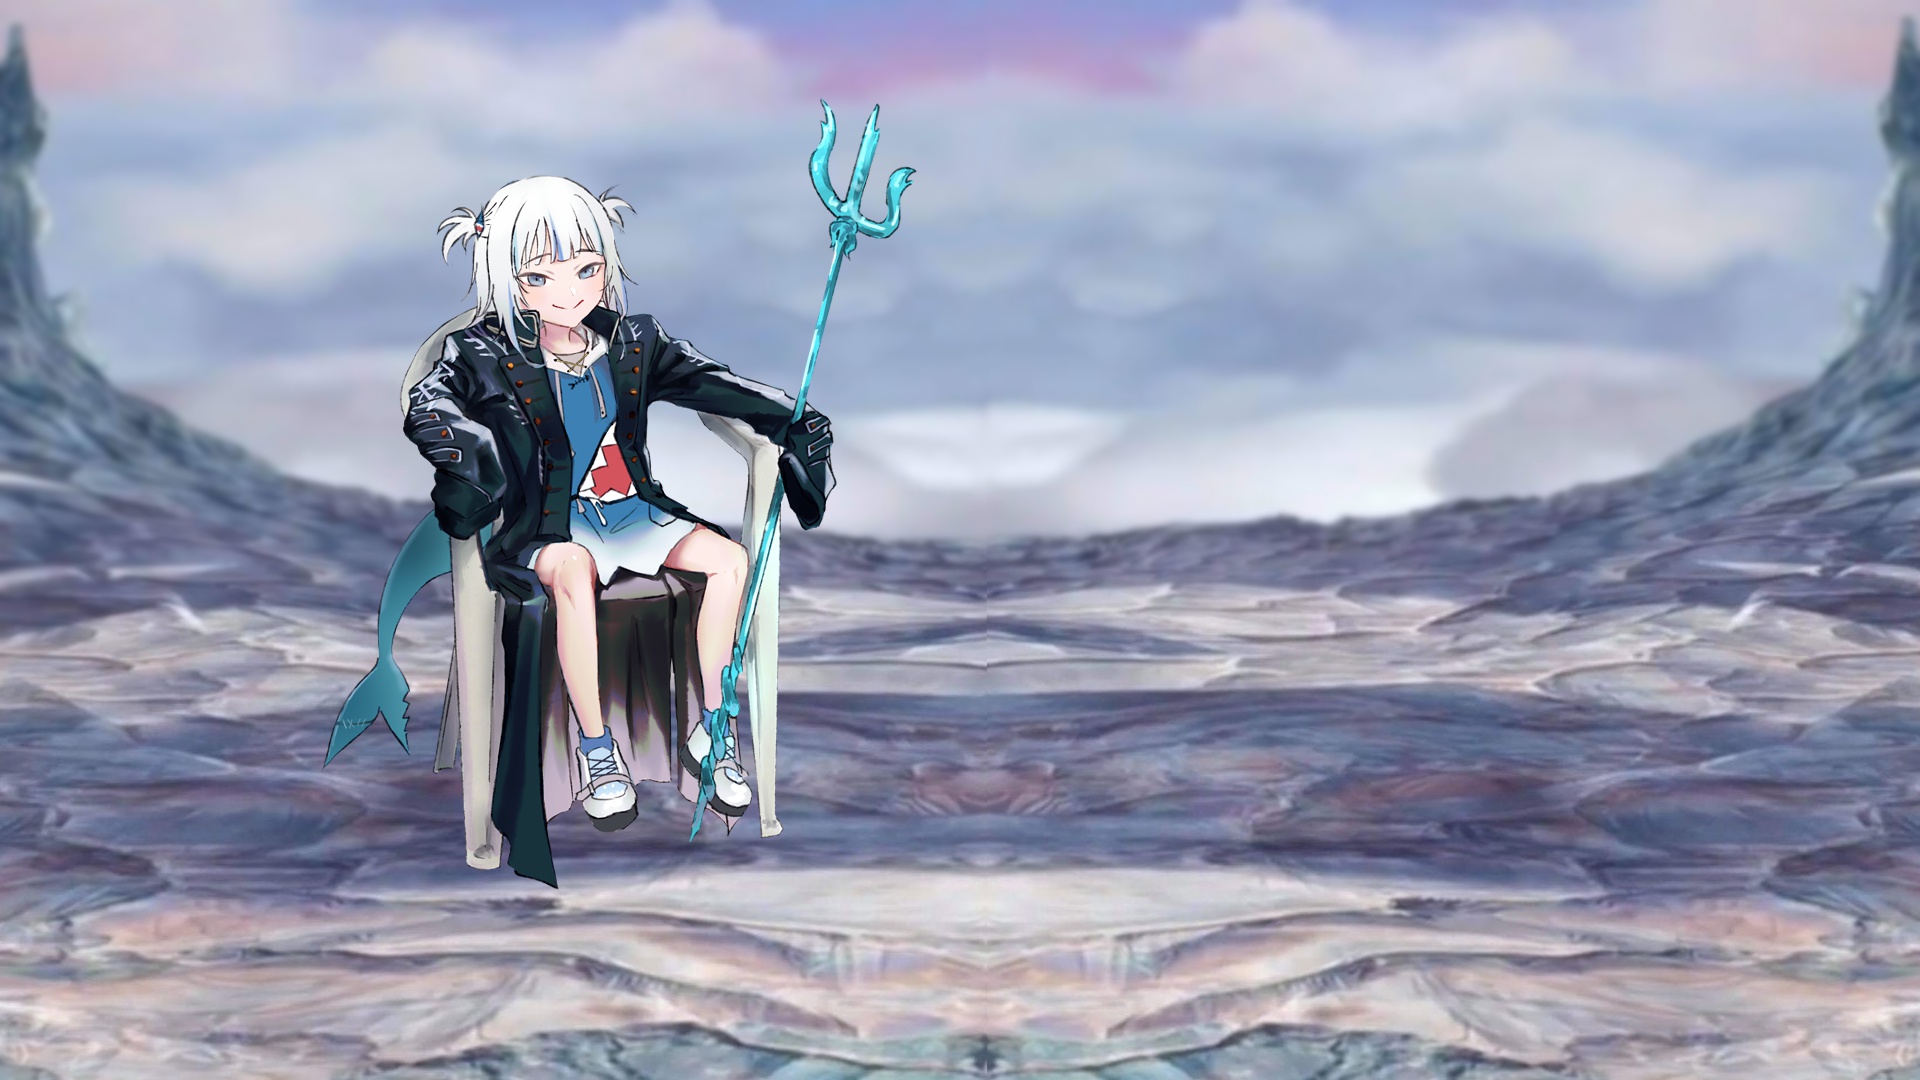 X 上的Hyde：「>Vergil's plastic chair See this is what you call a true gamer」 /  X